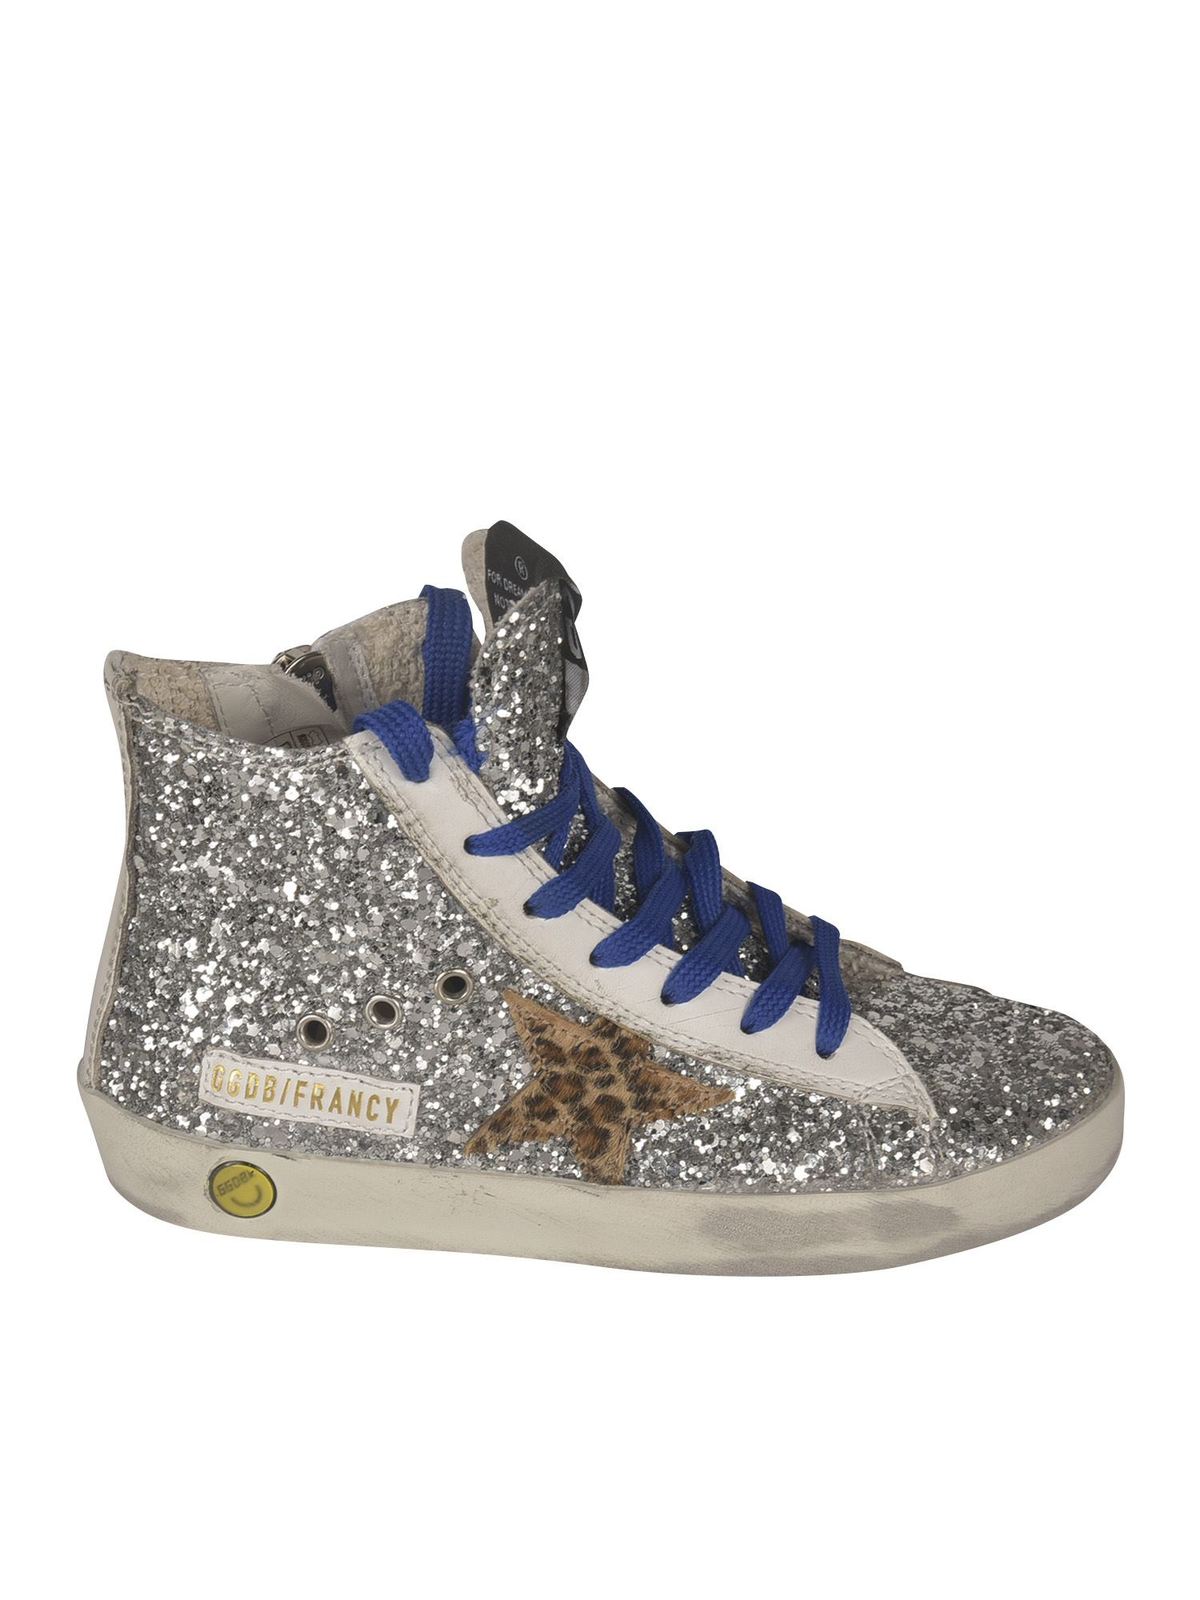 Golden Goose Kids' Glittered Francy Classic Sneakers In Silver